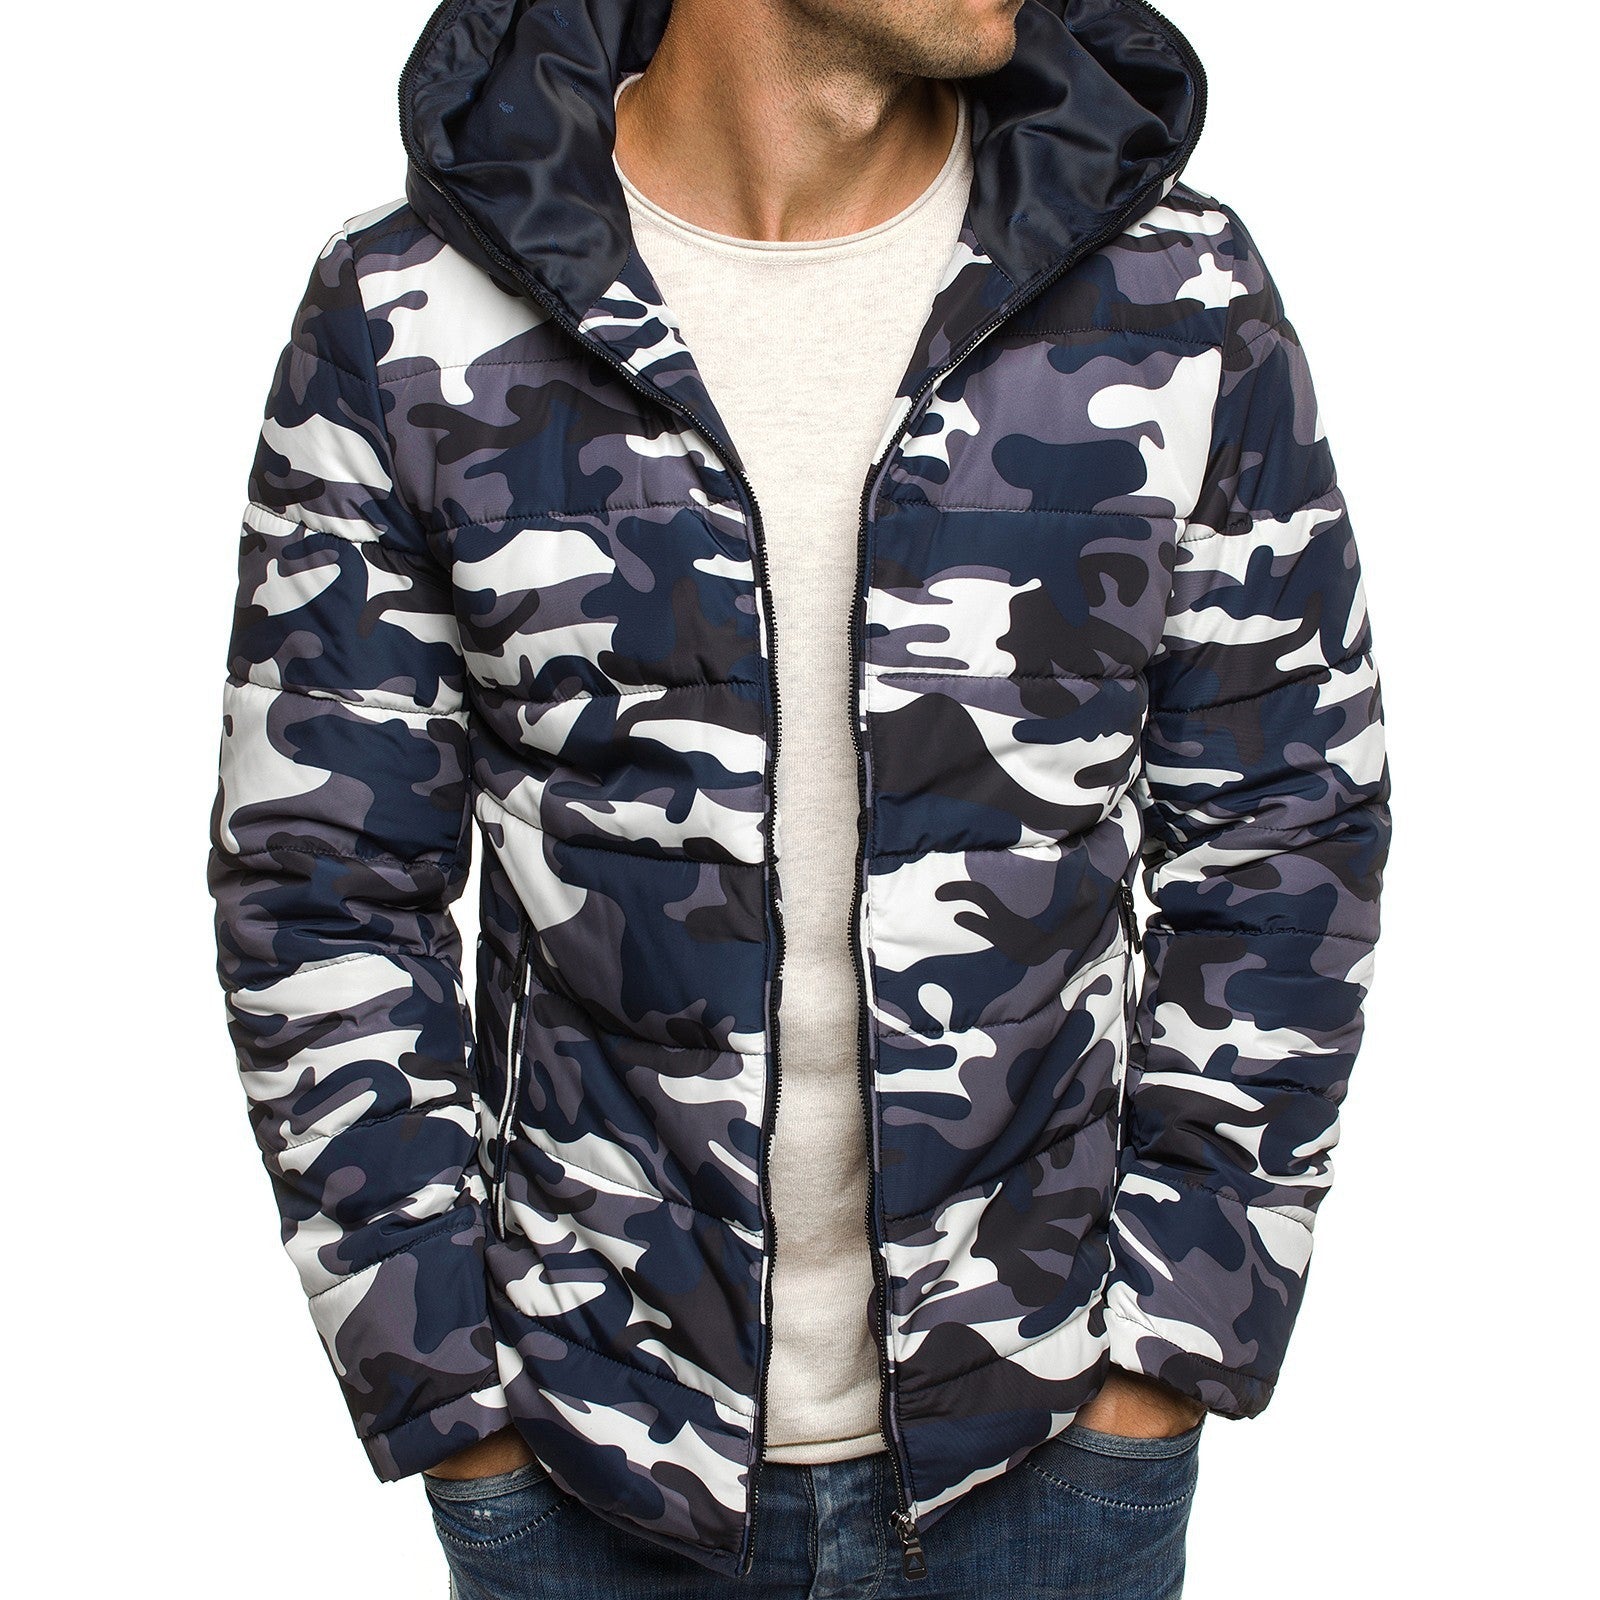  Military Matter Men's Morden Light Weight Camouflage Warm Winter Coat | The Best CS Tactical Clothing Store